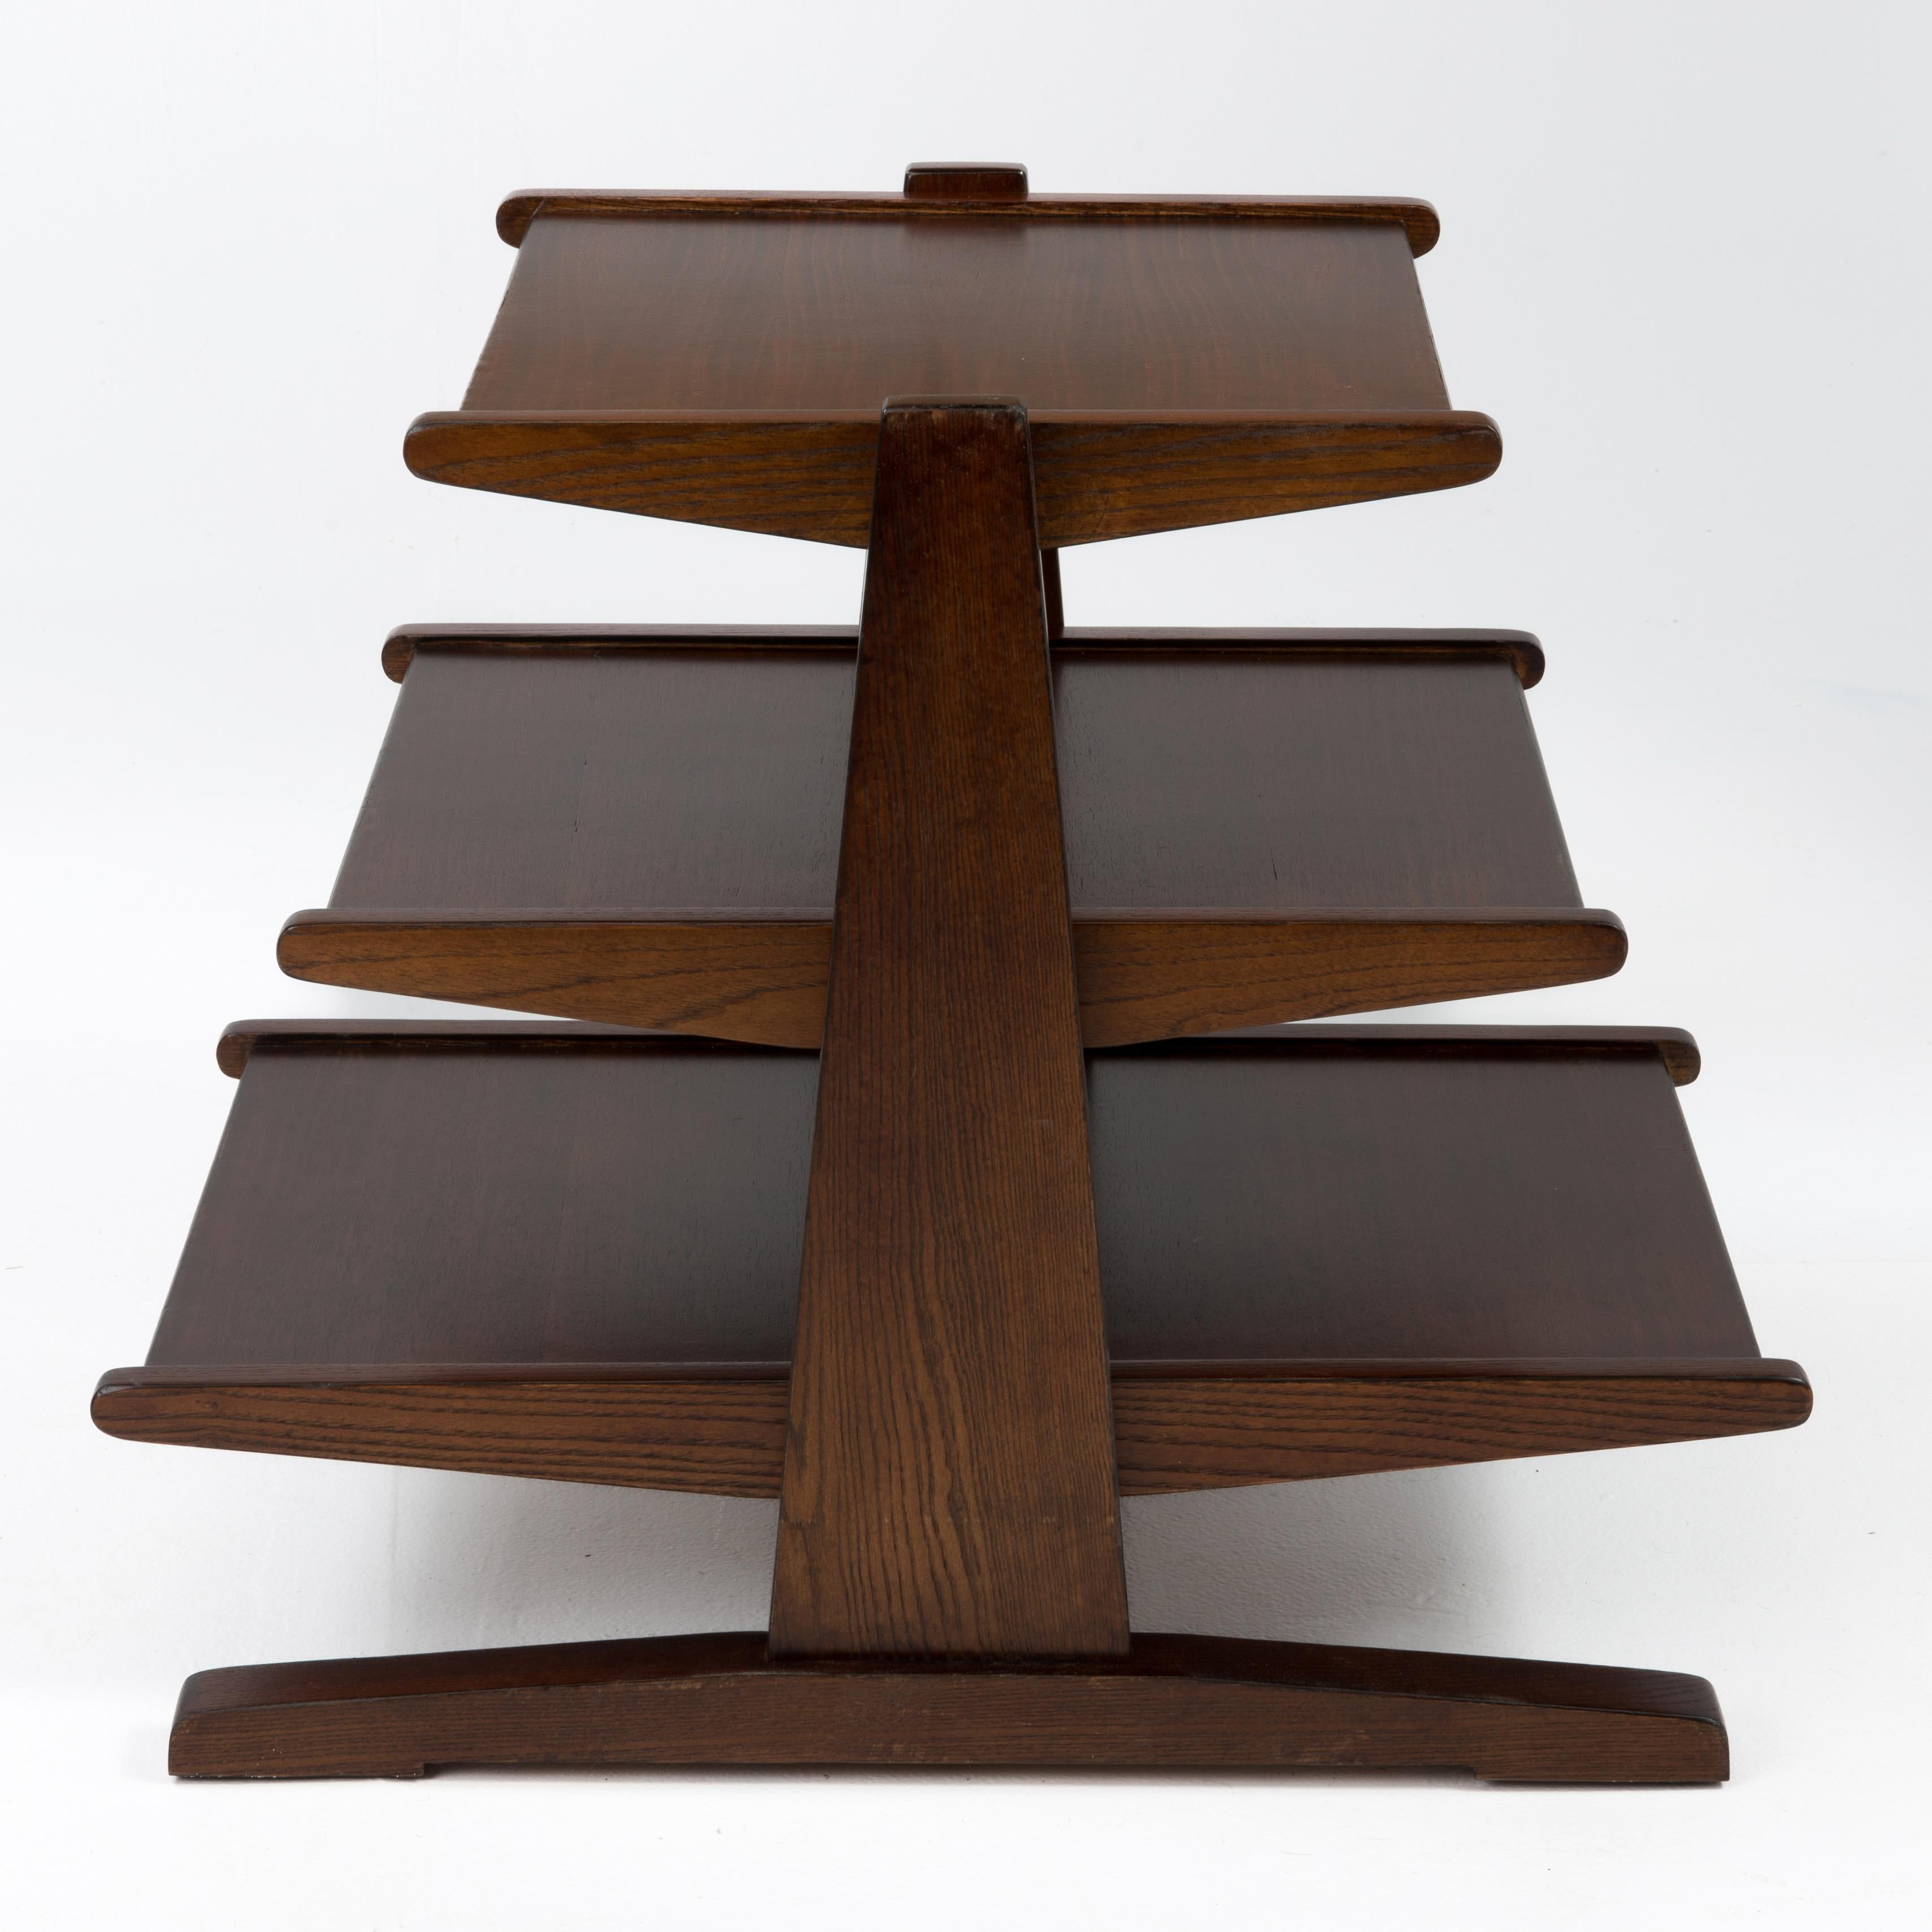 A three shelf magazine tree or table after the iconic Edward Wormley design for Dunbar.